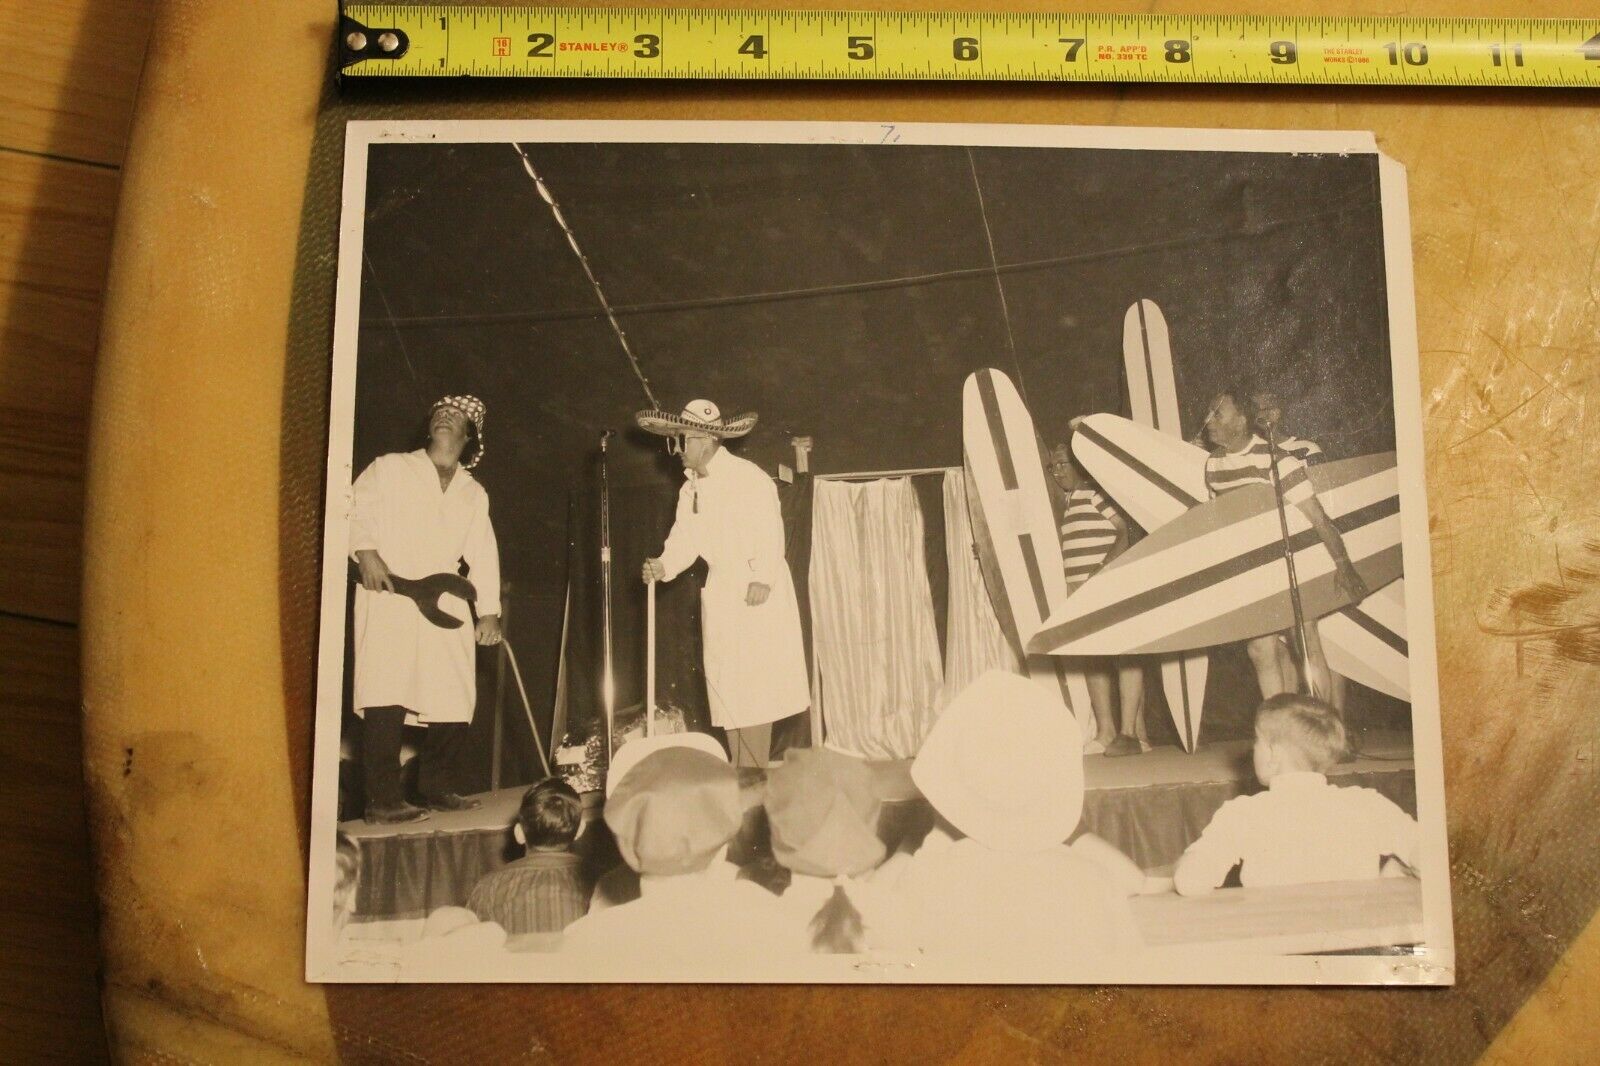 Waf Classic Hawaii Surf Show Surfboard Play Acting Cr8(p) Vintage Surfing Photo